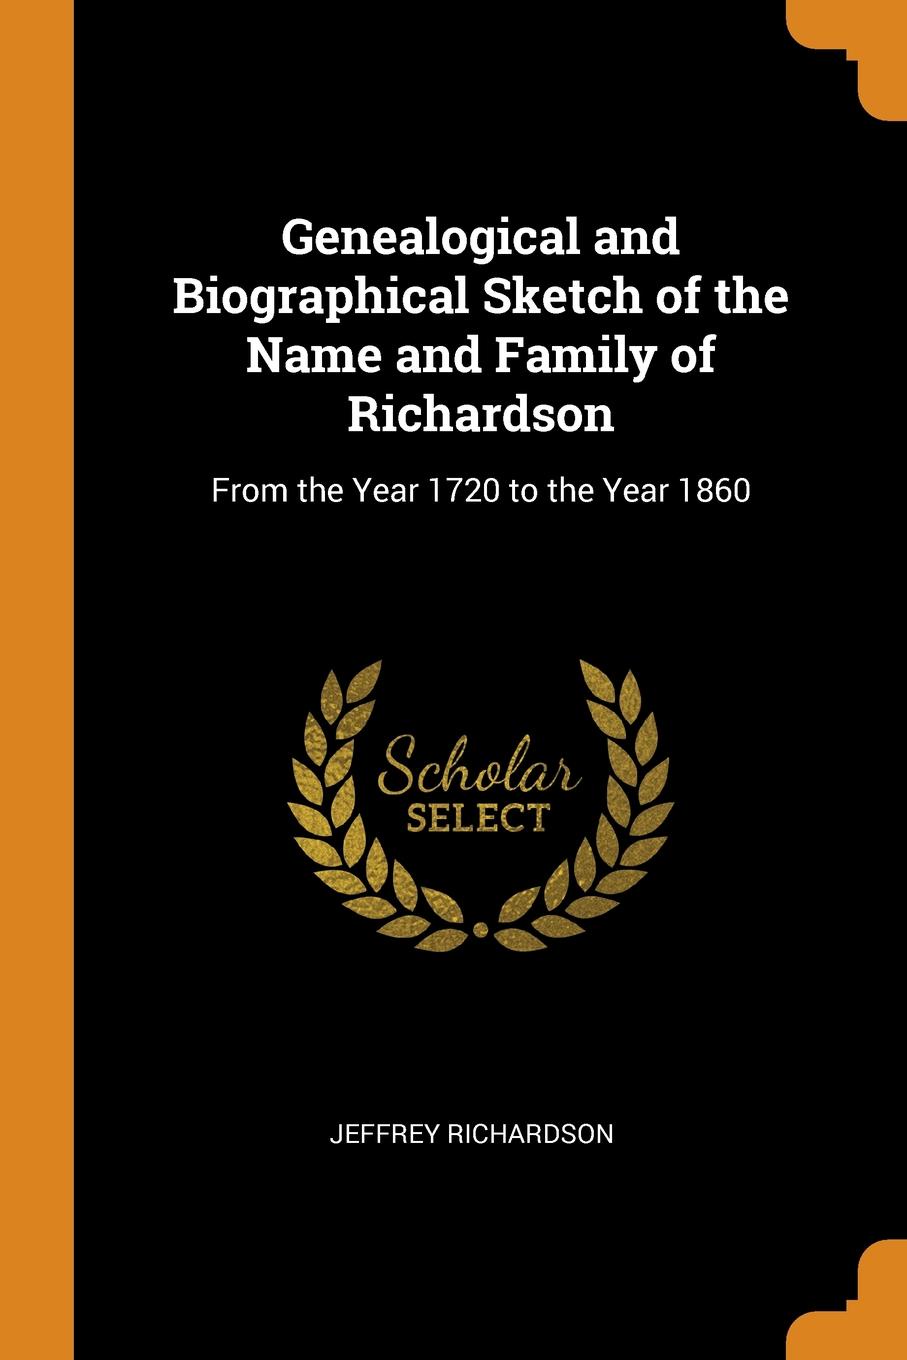 Genealogical and Biographical Sketch of the Name and Family of Richardson. From the Year 1720 to the Year 1860